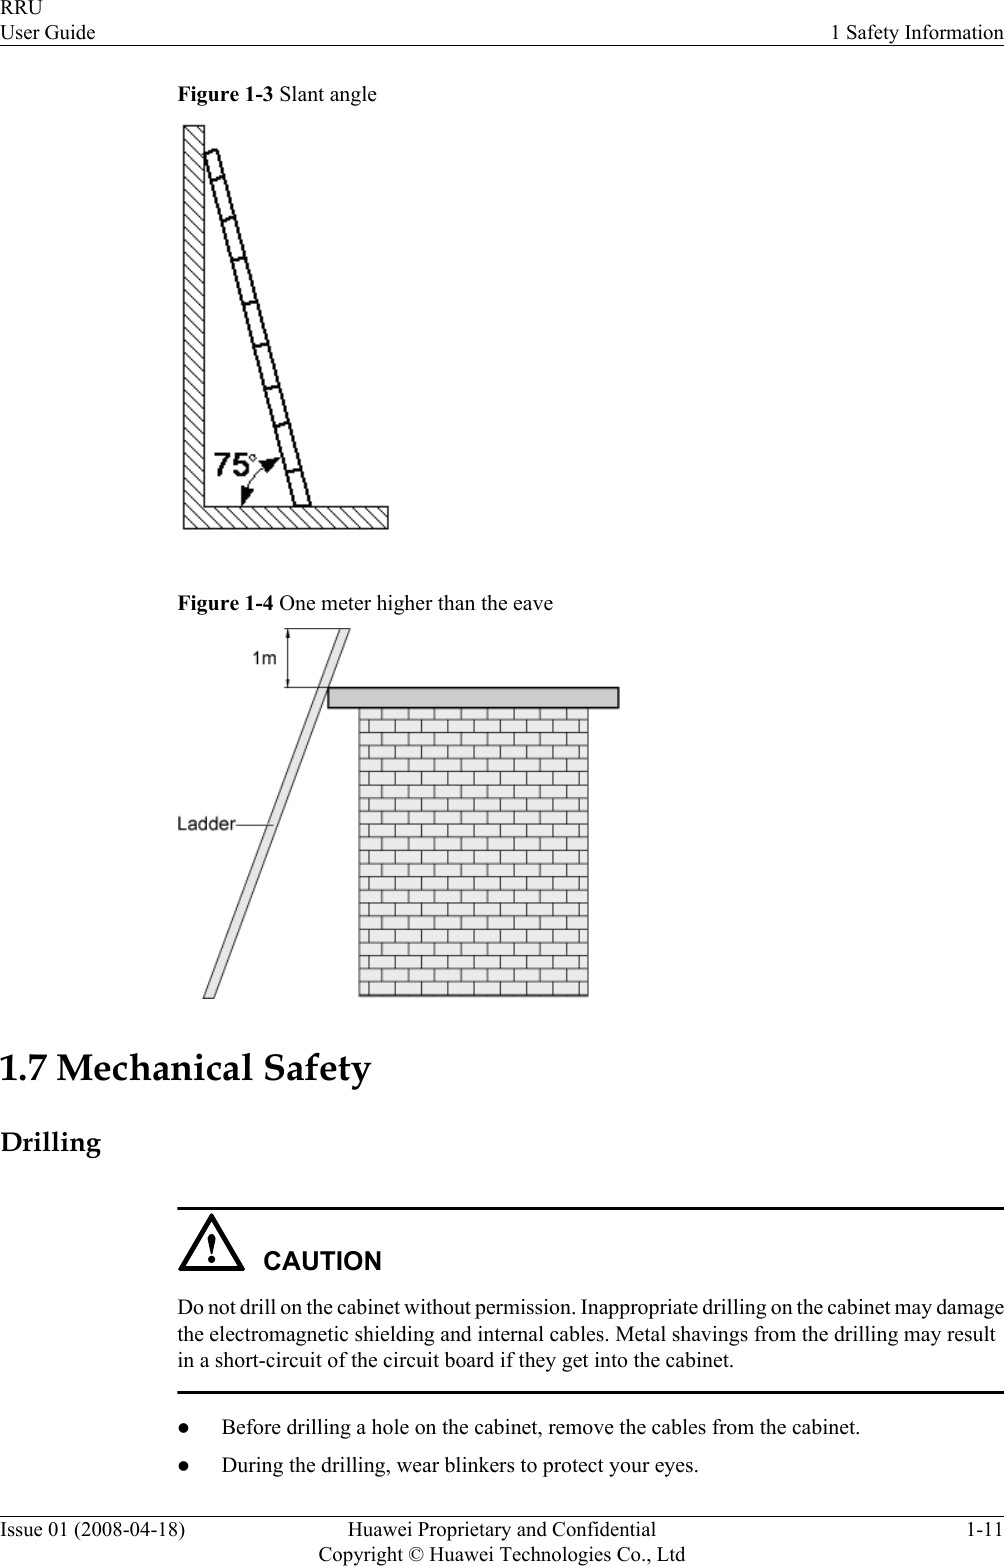 Figure 1-3 Slant angleFigure 1-4 One meter higher than the eave1.7 Mechanical SafetyDrillingCAUTIONDo not drill on the cabinet without permission. Inappropriate drilling on the cabinet may damagethe electromagnetic shielding and internal cables. Metal shavings from the drilling may resultin a short-circuit of the circuit board if they get into the cabinet.lBefore drilling a hole on the cabinet, remove the cables from the cabinet.lDuring the drilling, wear blinkers to protect your eyes.RRUUser Guide 1 Safety InformationIssue 01 (2008-04-18) Huawei Proprietary and ConfidentialCopyright © Huawei Technologies Co., Ltd1-11